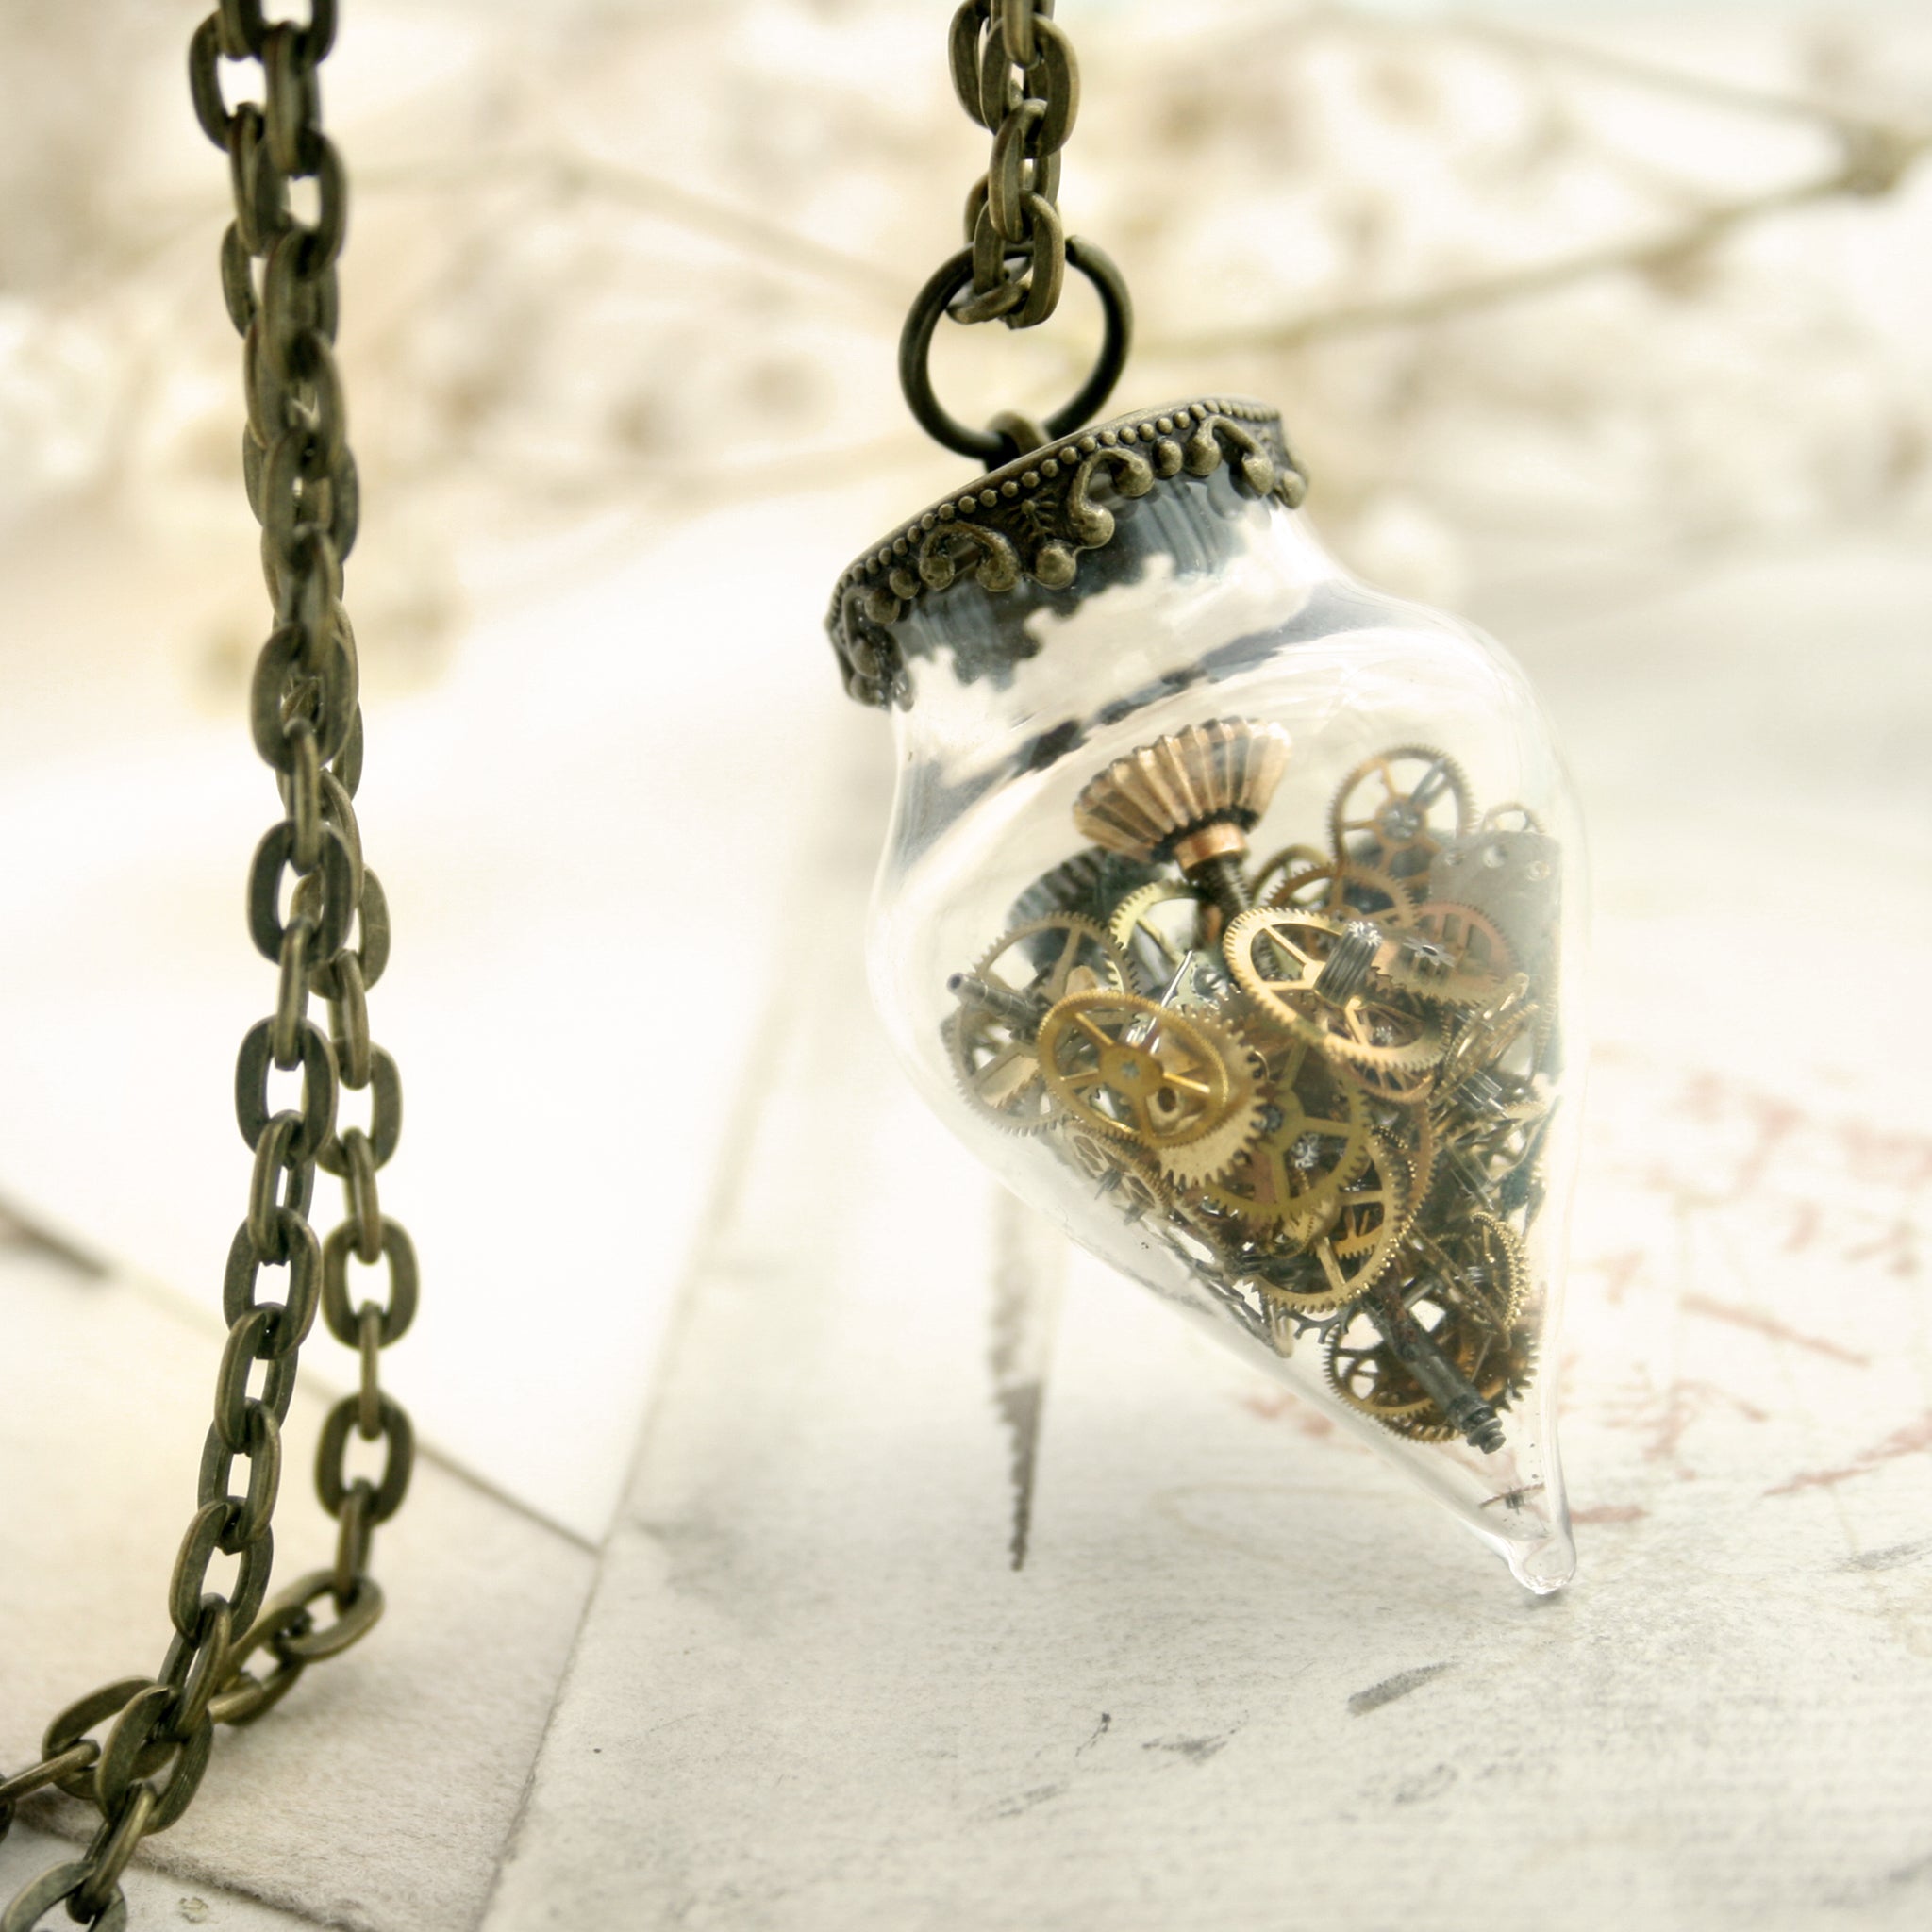 steampunk time capsule, terrarium pendant necklace made of glass in conical shape